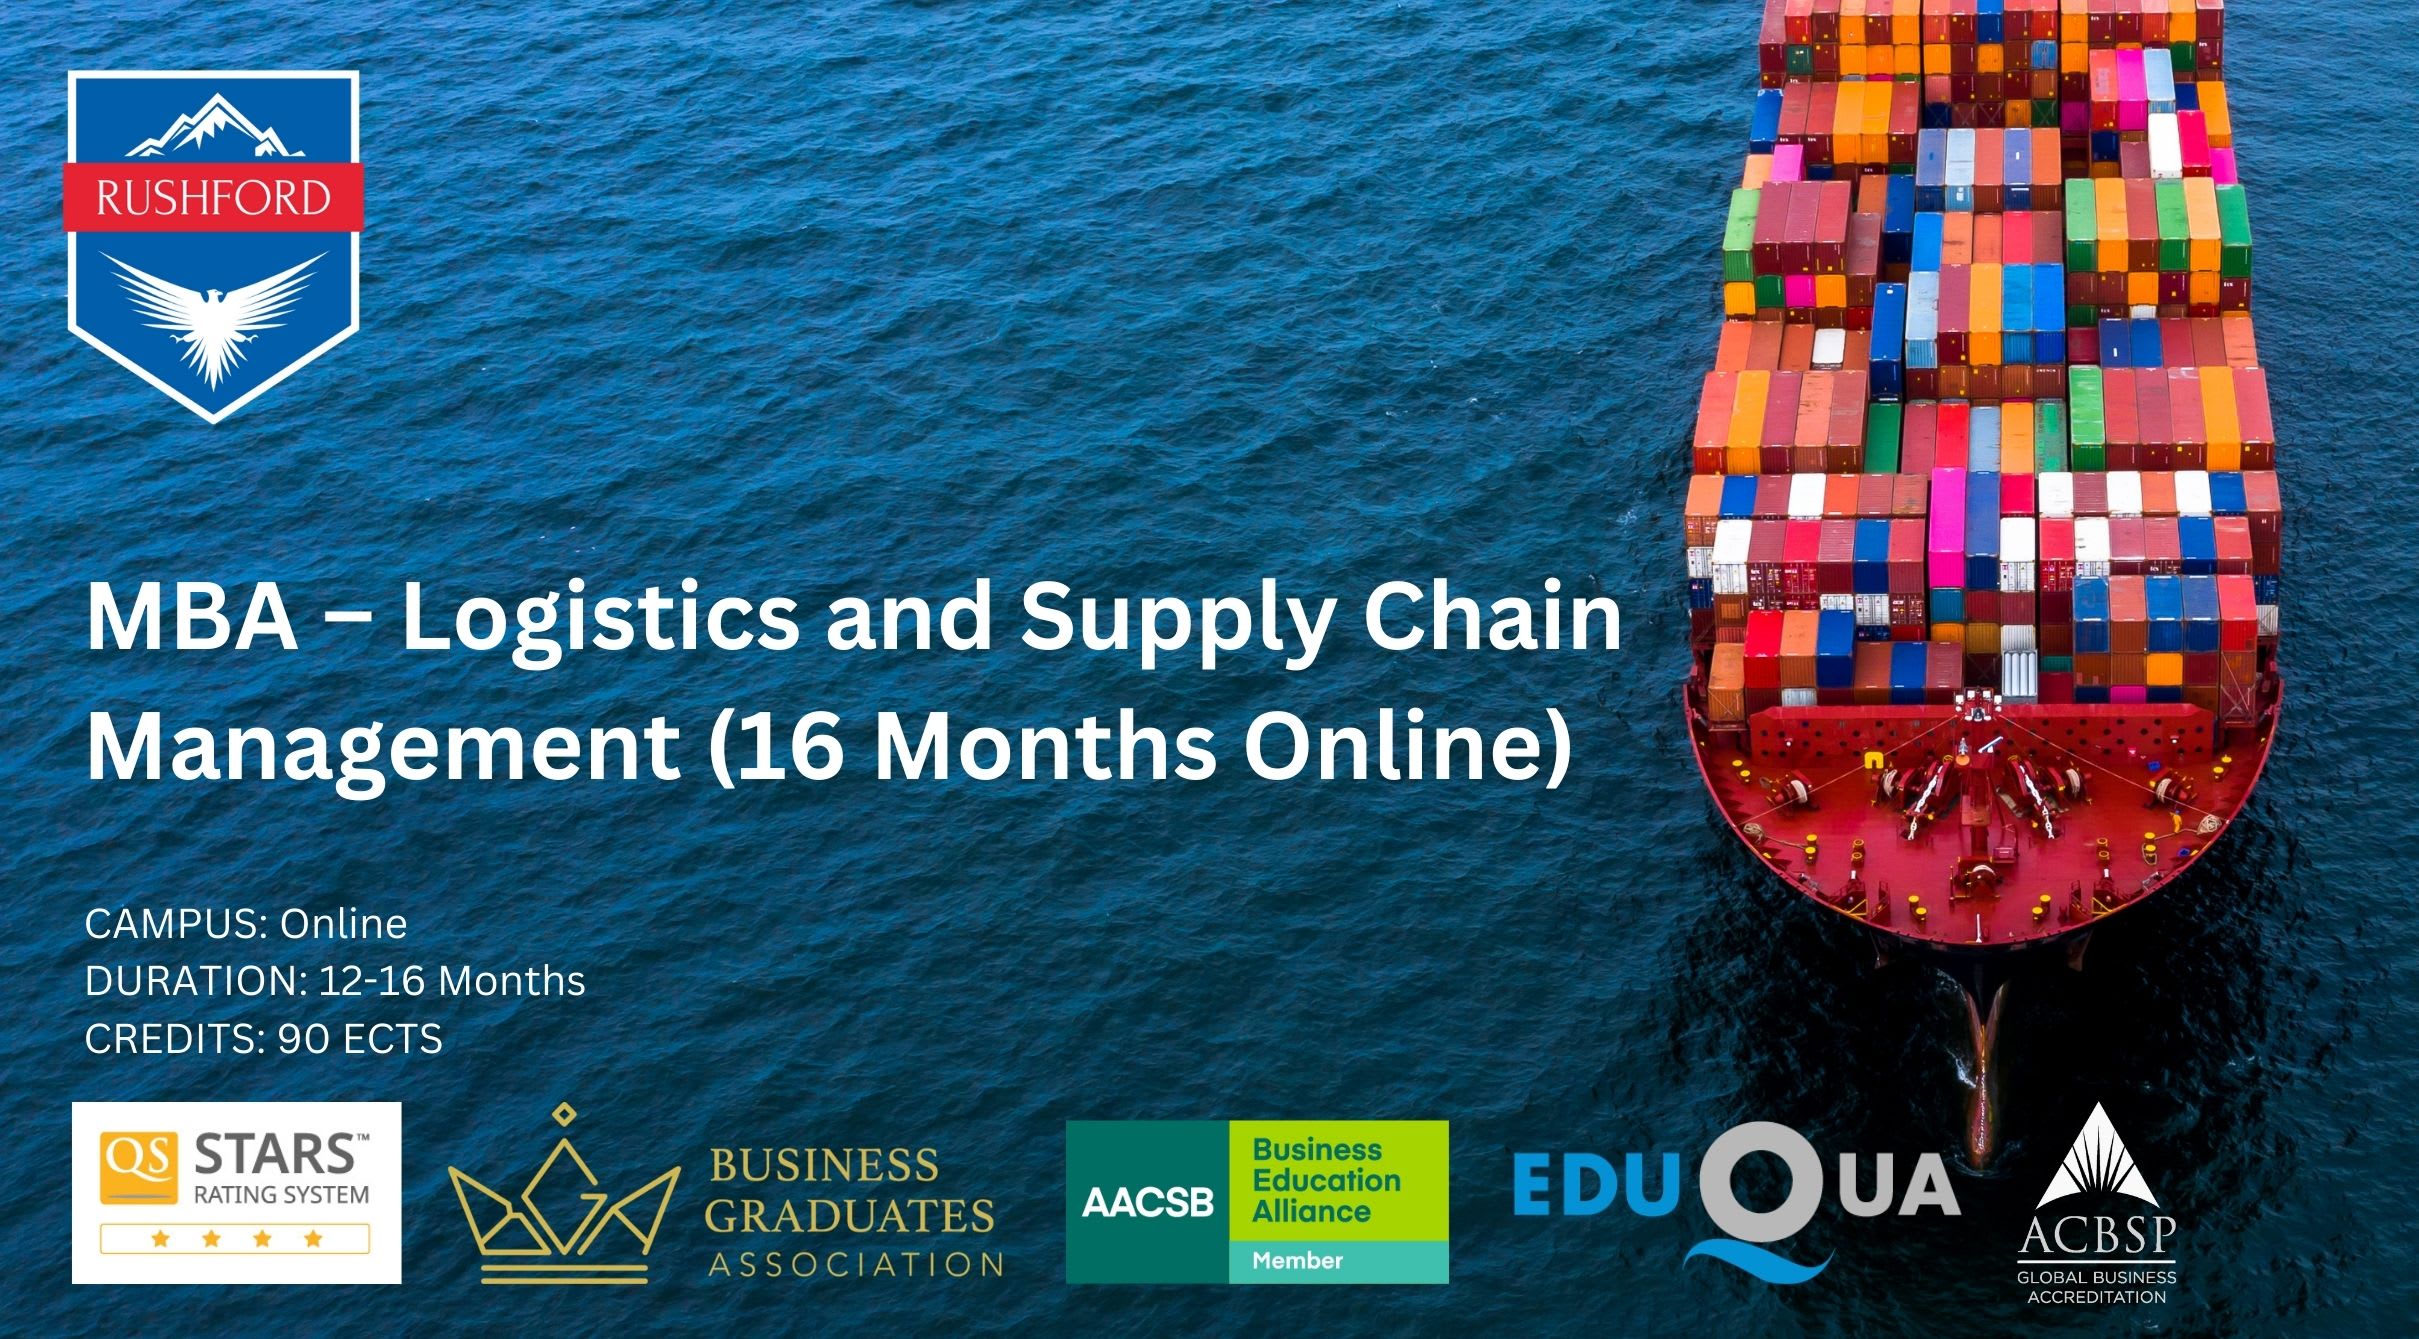 MBA – Logistics and Supply Chain Management (16 Months Online)